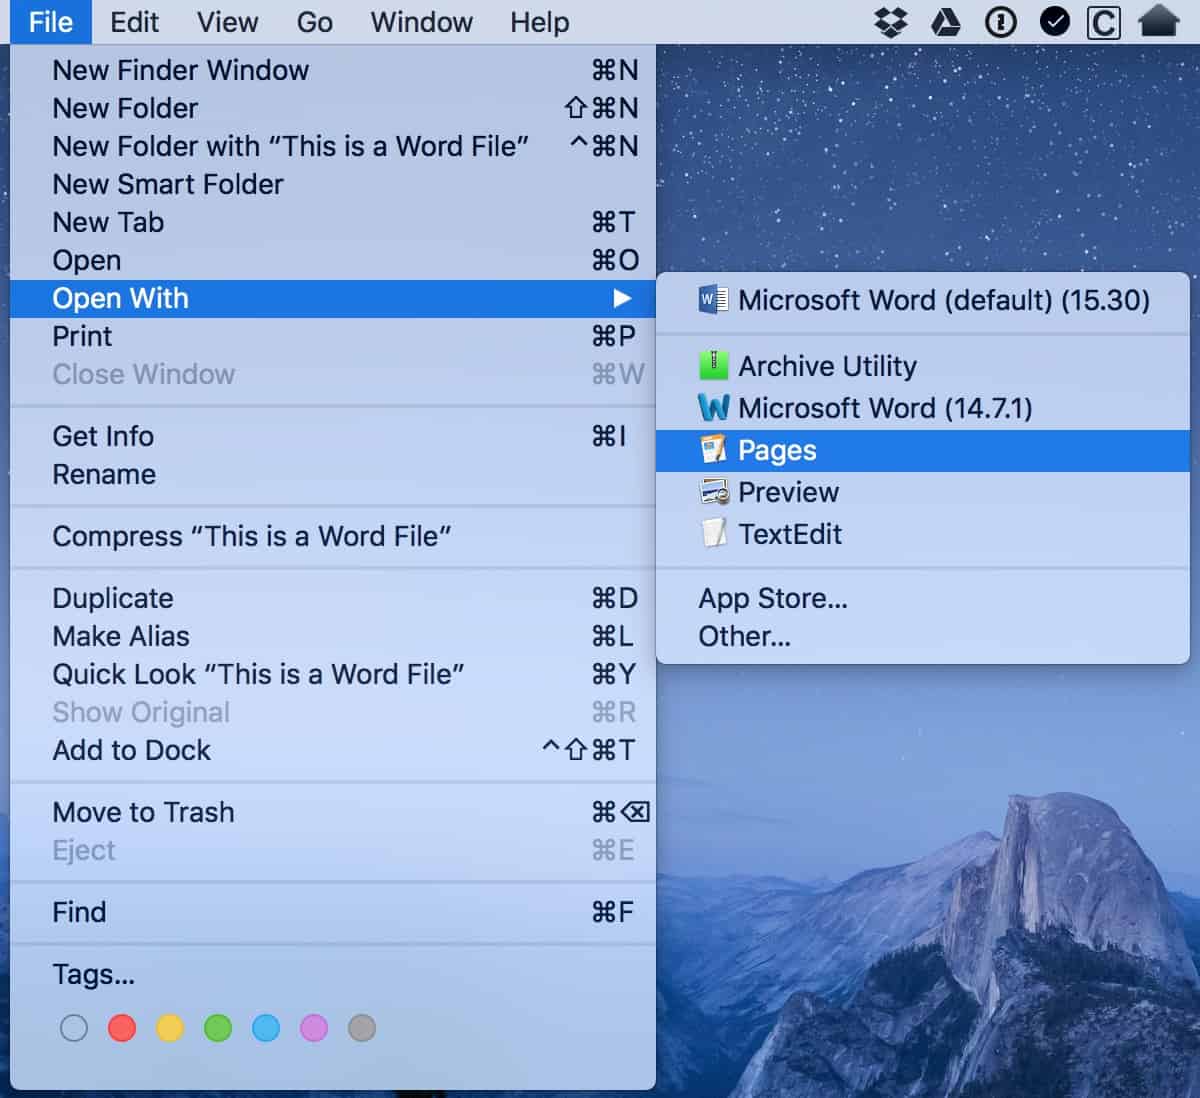 macOS File Menu showing Open With